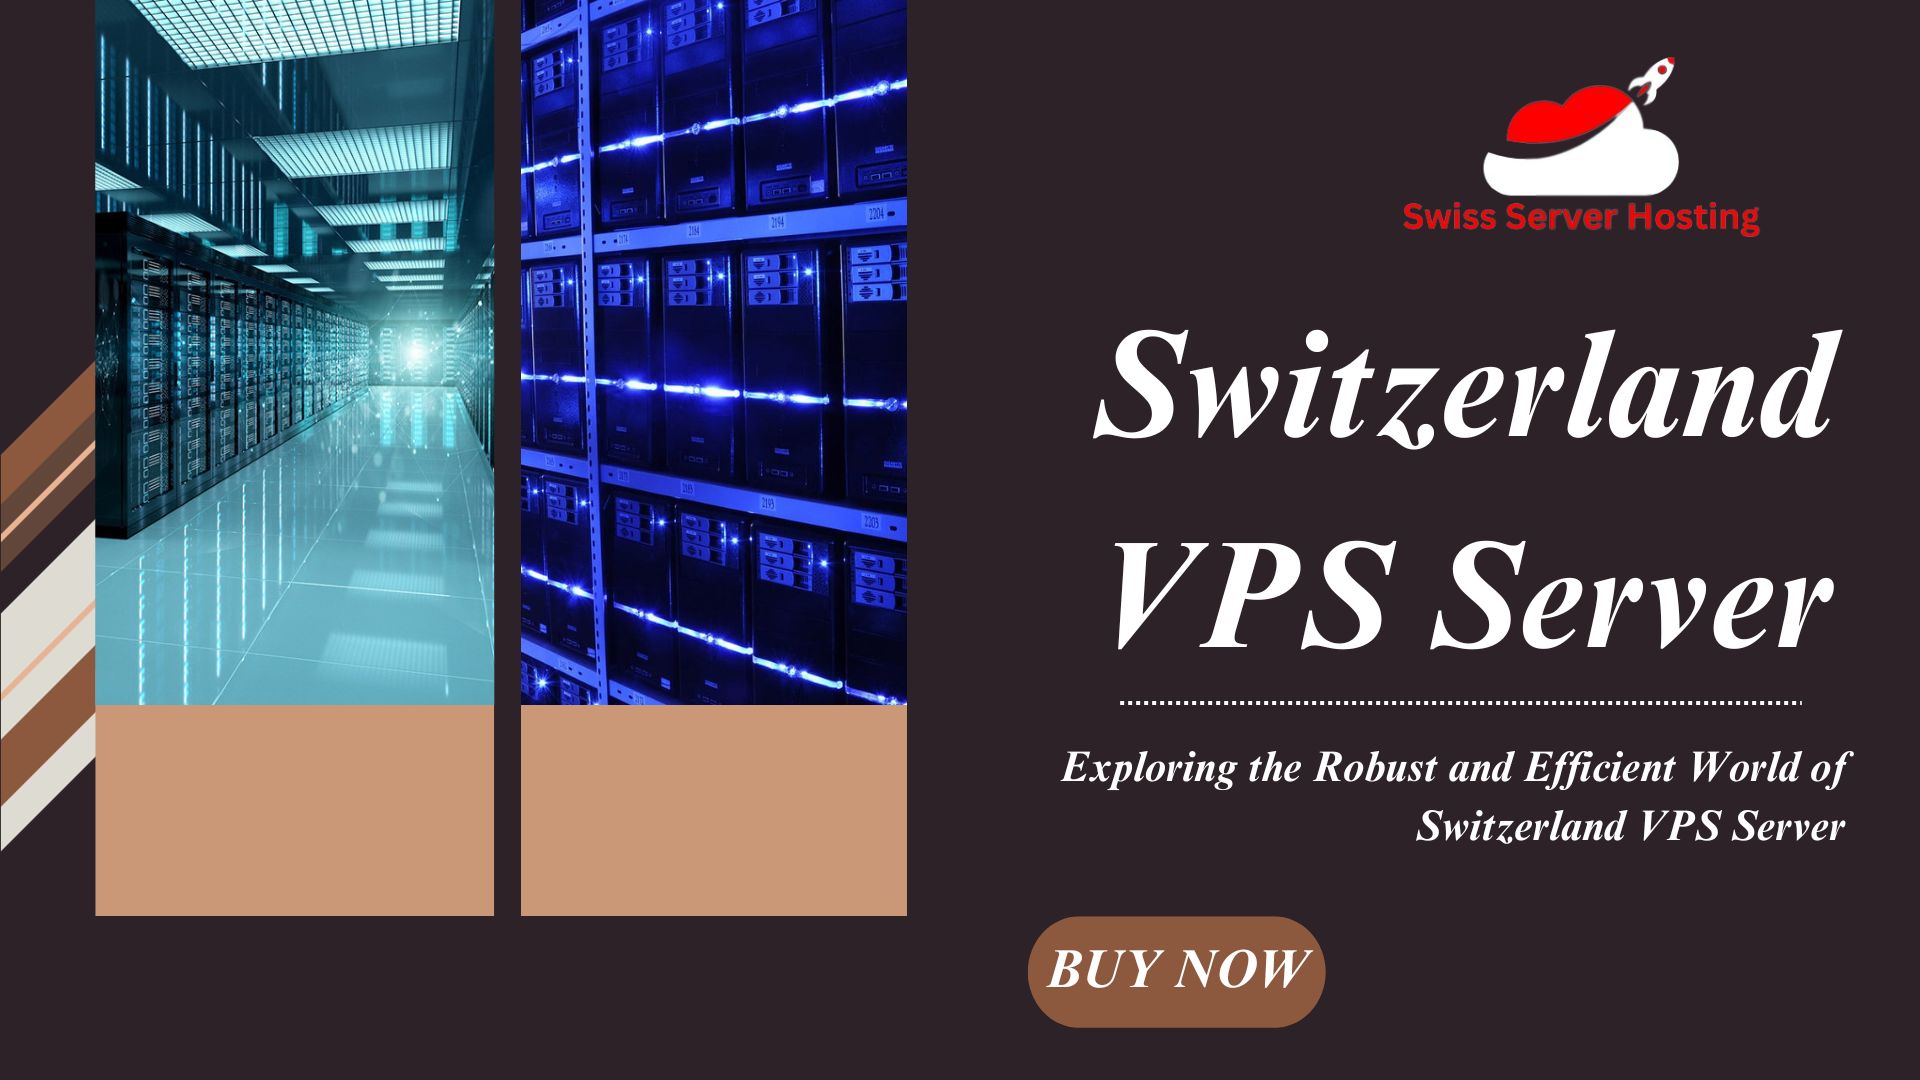 Exploring the Robust and Efficient World of Switzerland VPS Server